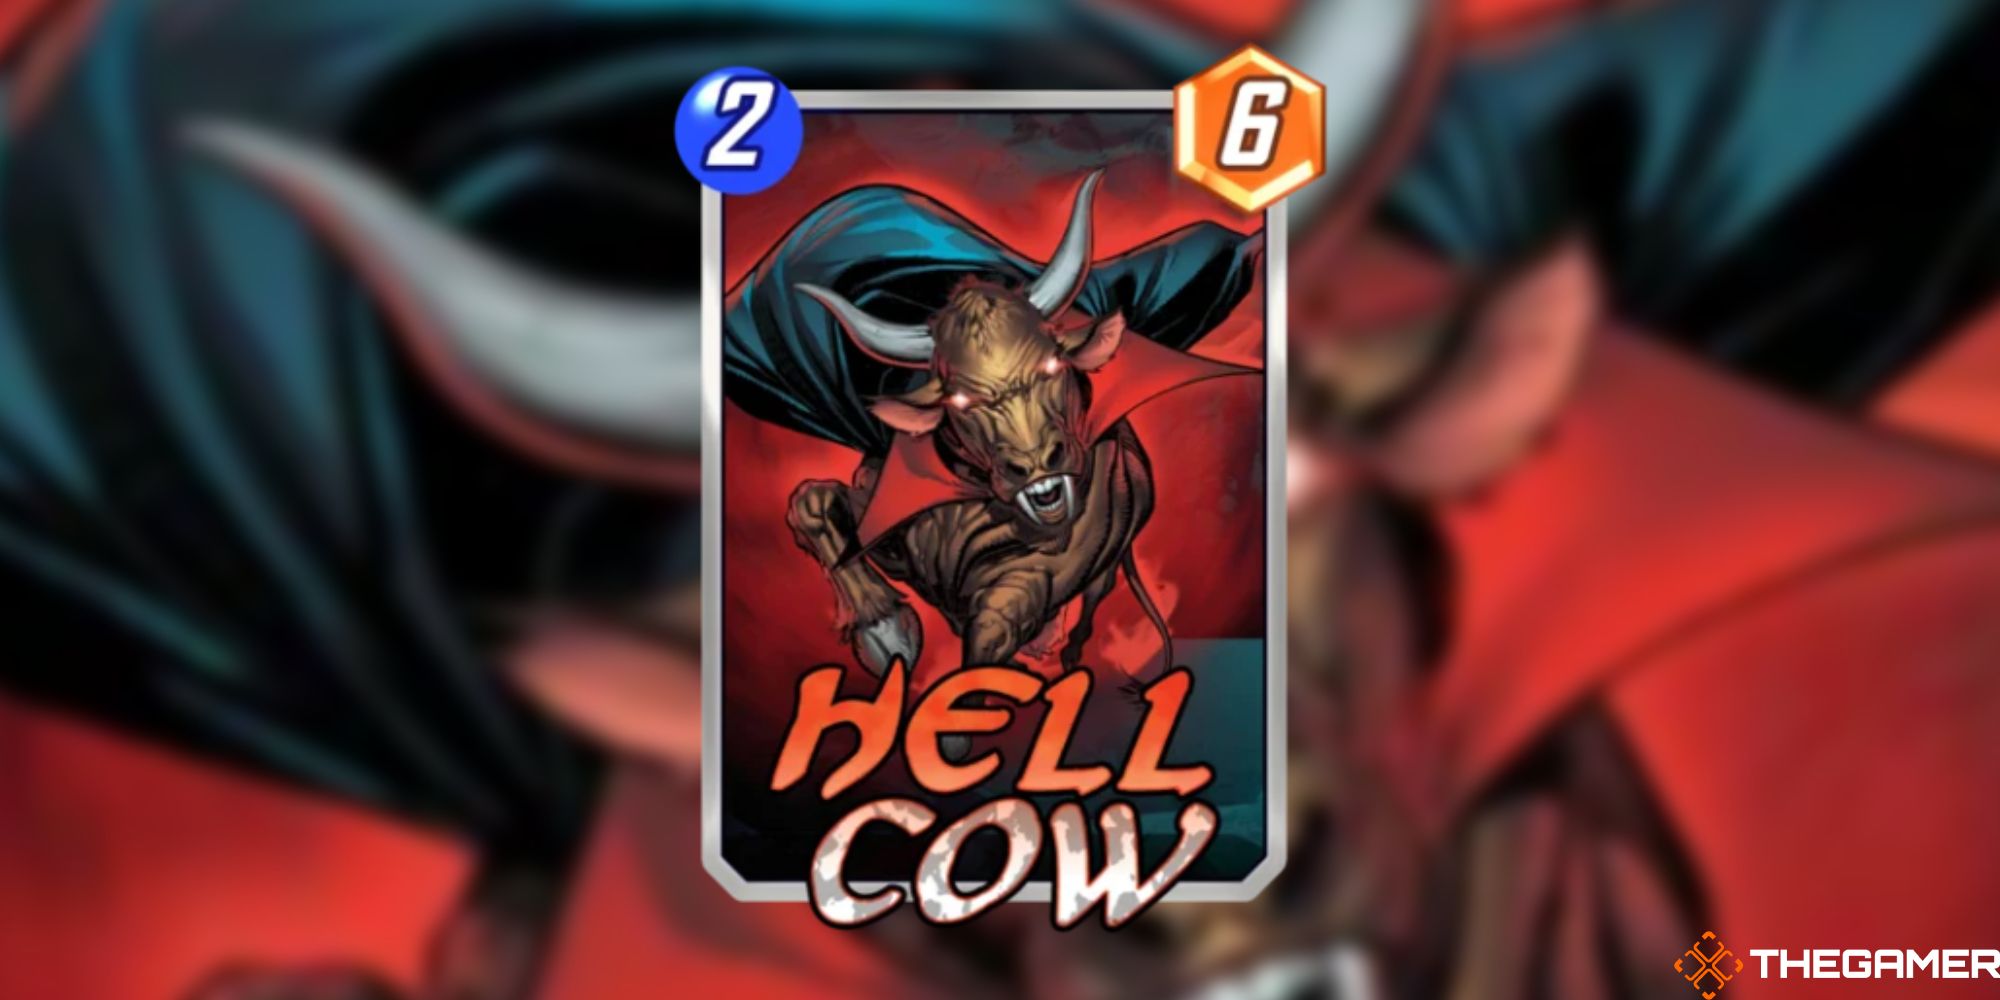 Marvel Snap - Hell Cow on a blurred background